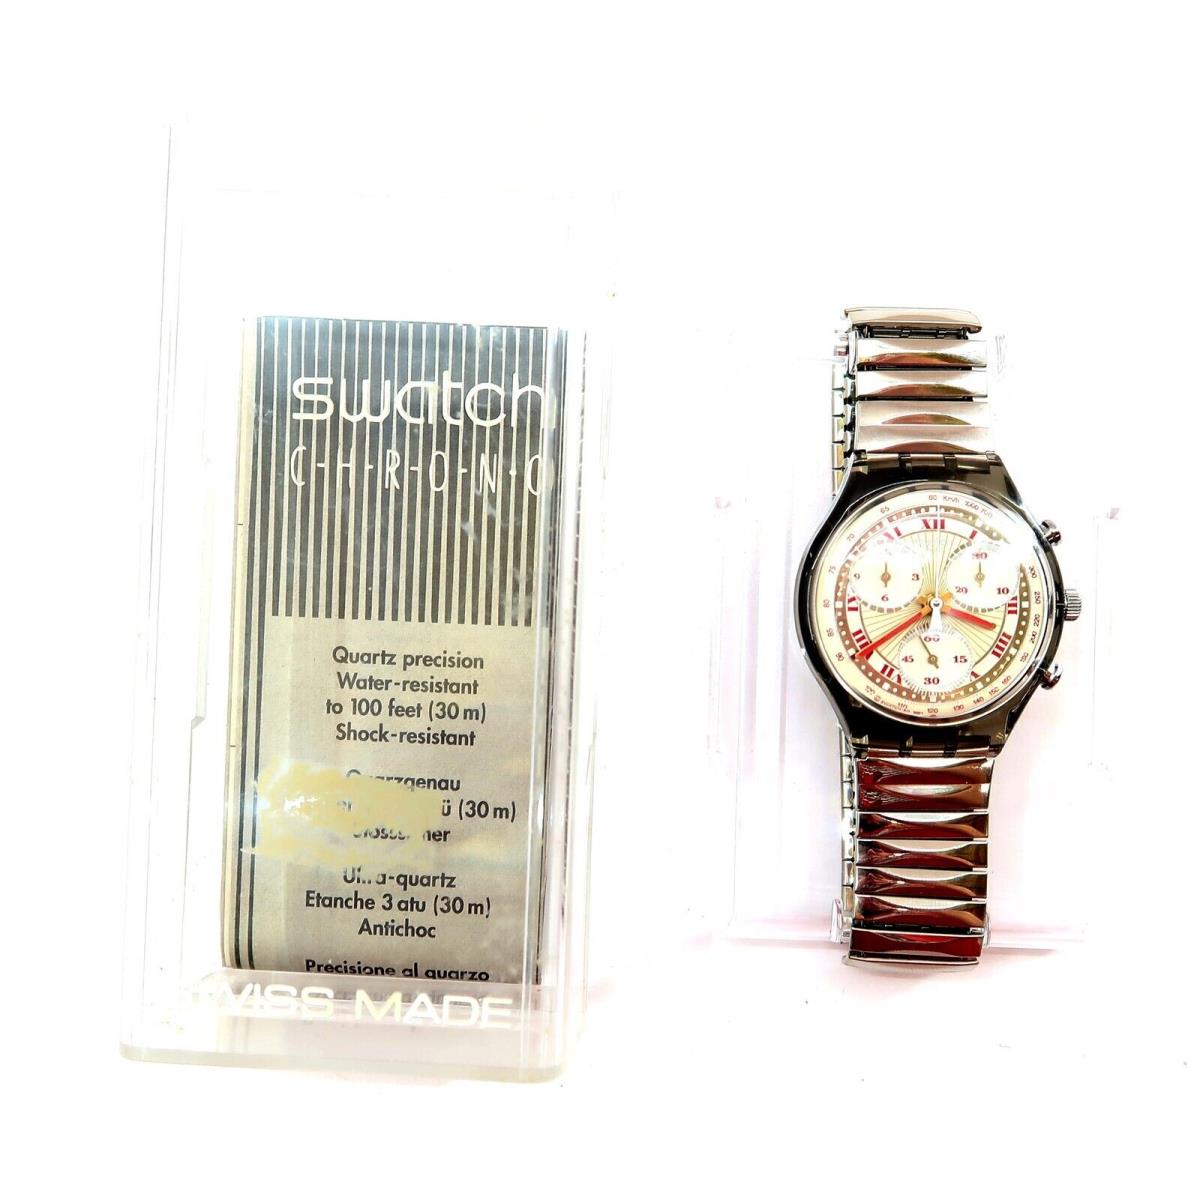 Swatch Chrono Watch Pleasure Dome SCM106 / 107 Mid Size Case and Papers 1994 - Dial: White, Band: Silver, Bezel: Clear